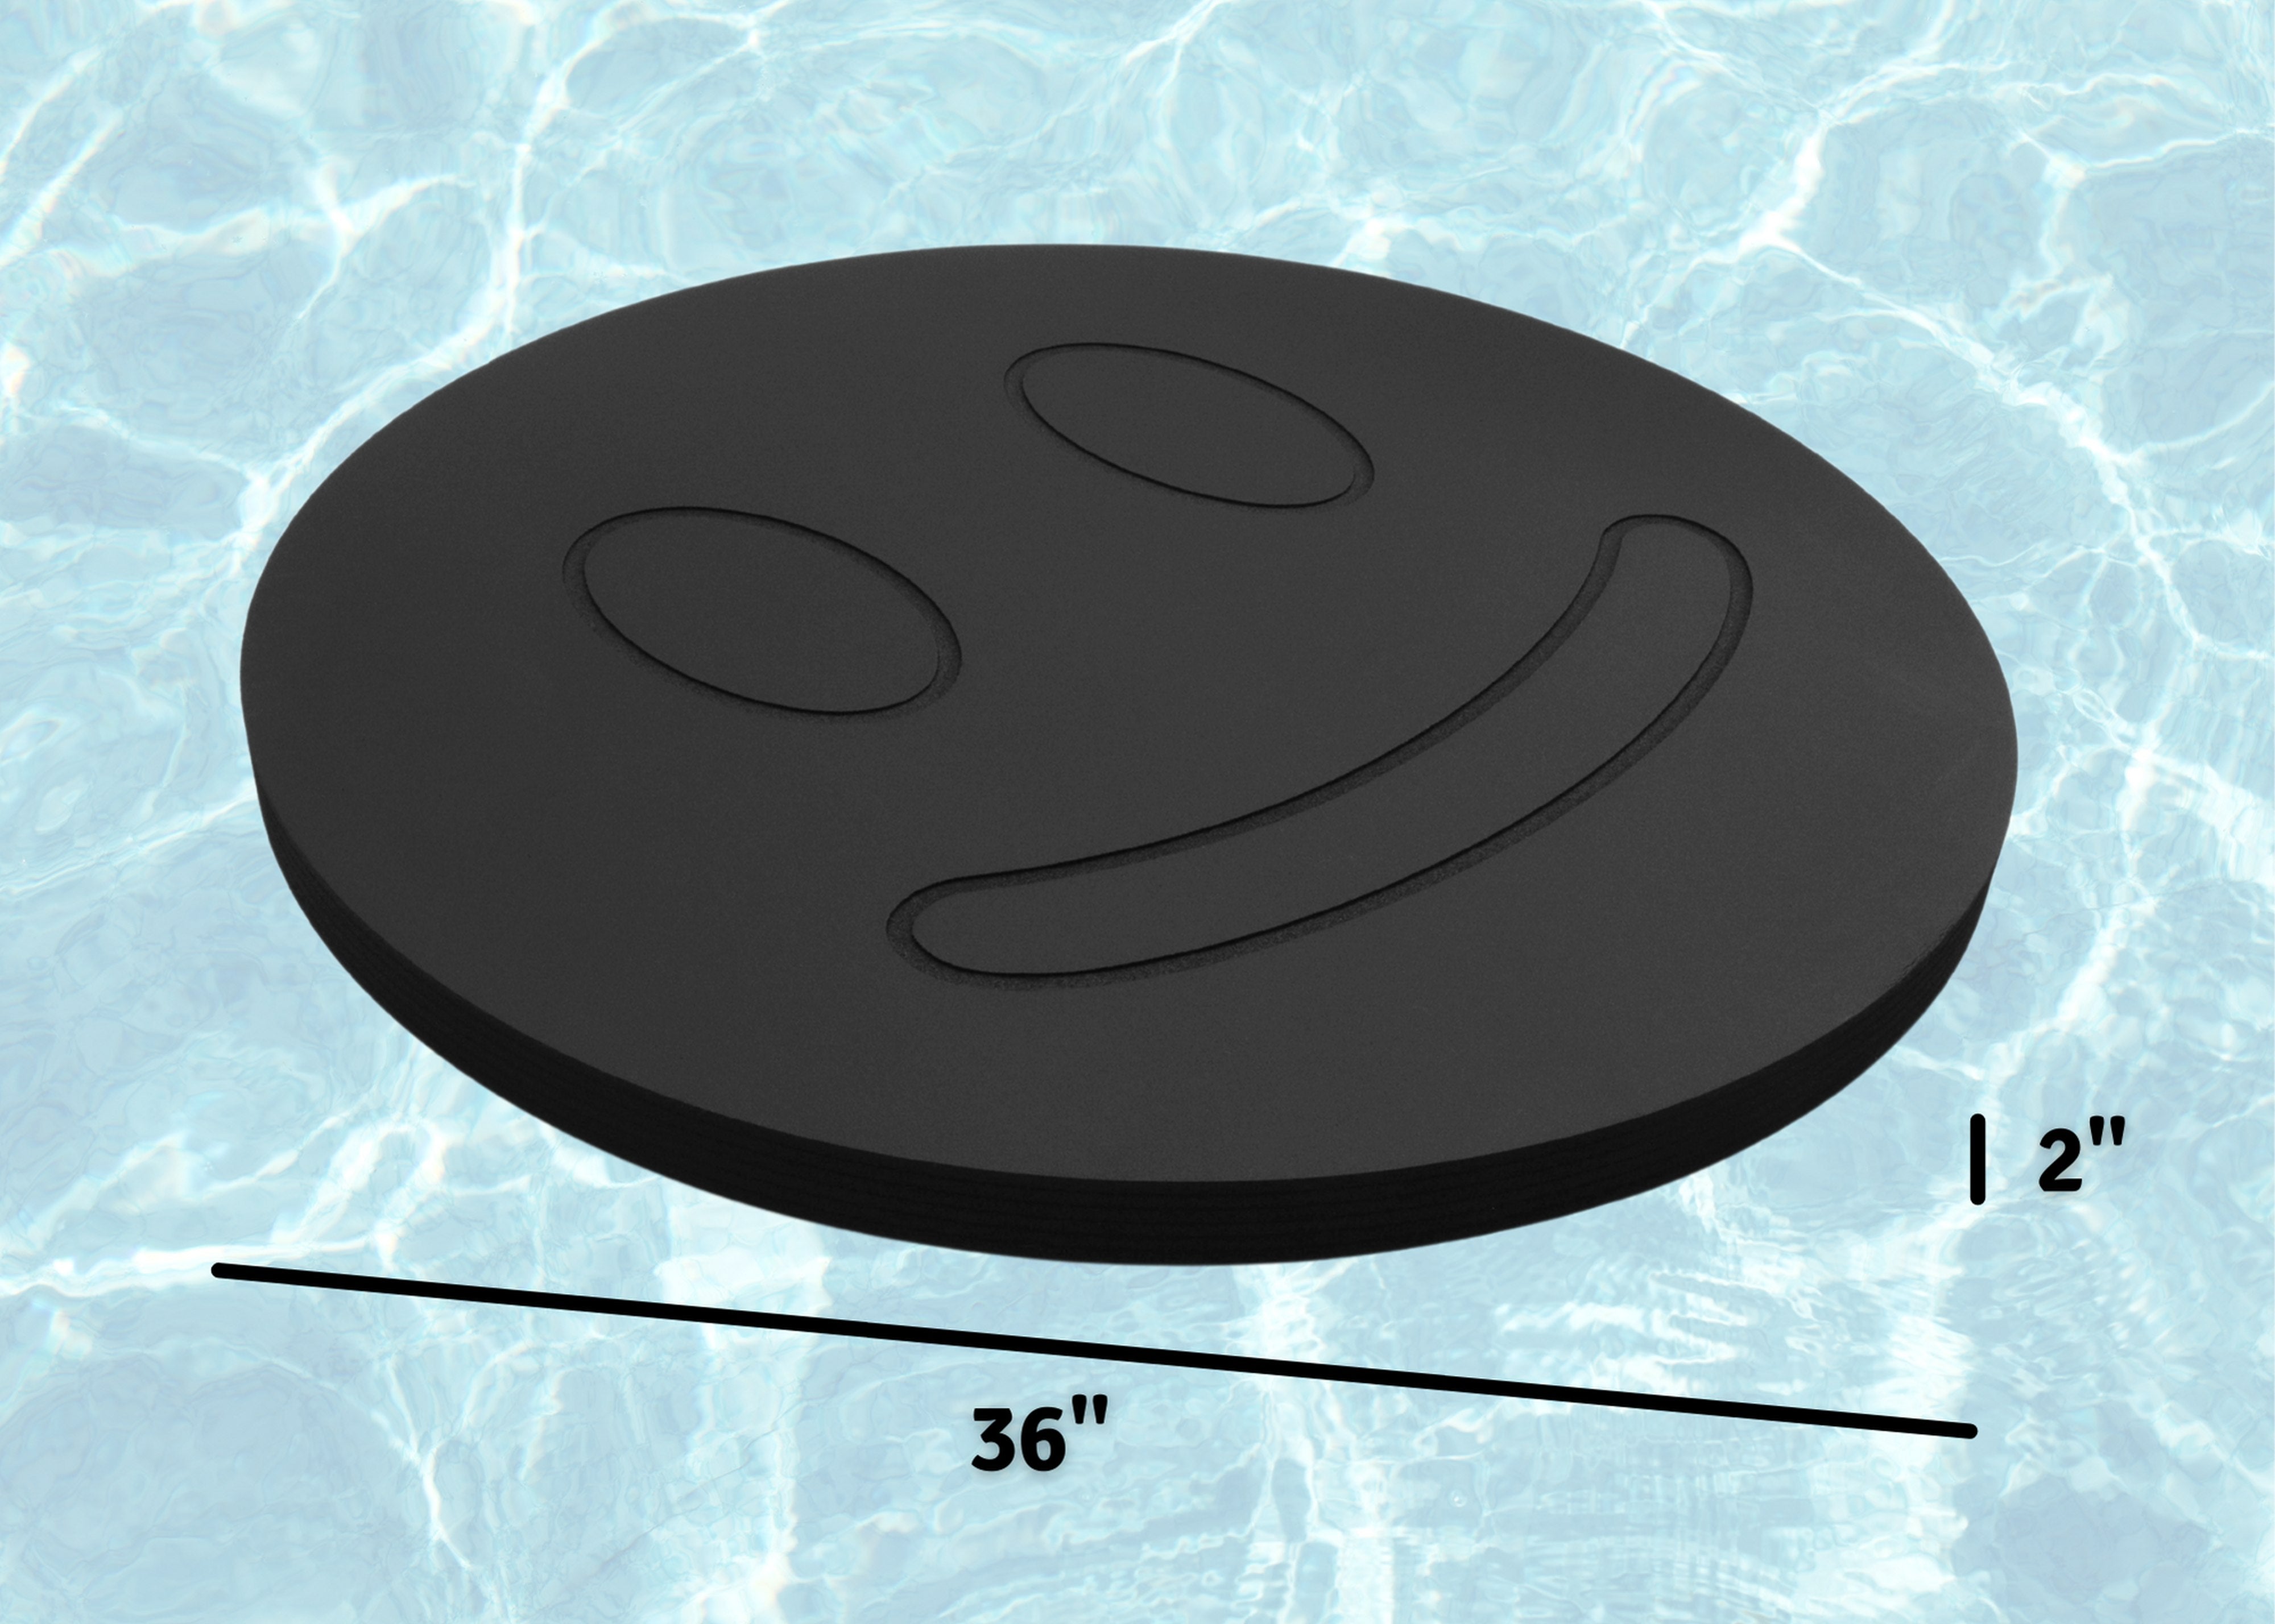 Floating Smiley Face Lounging Pool Float 40"